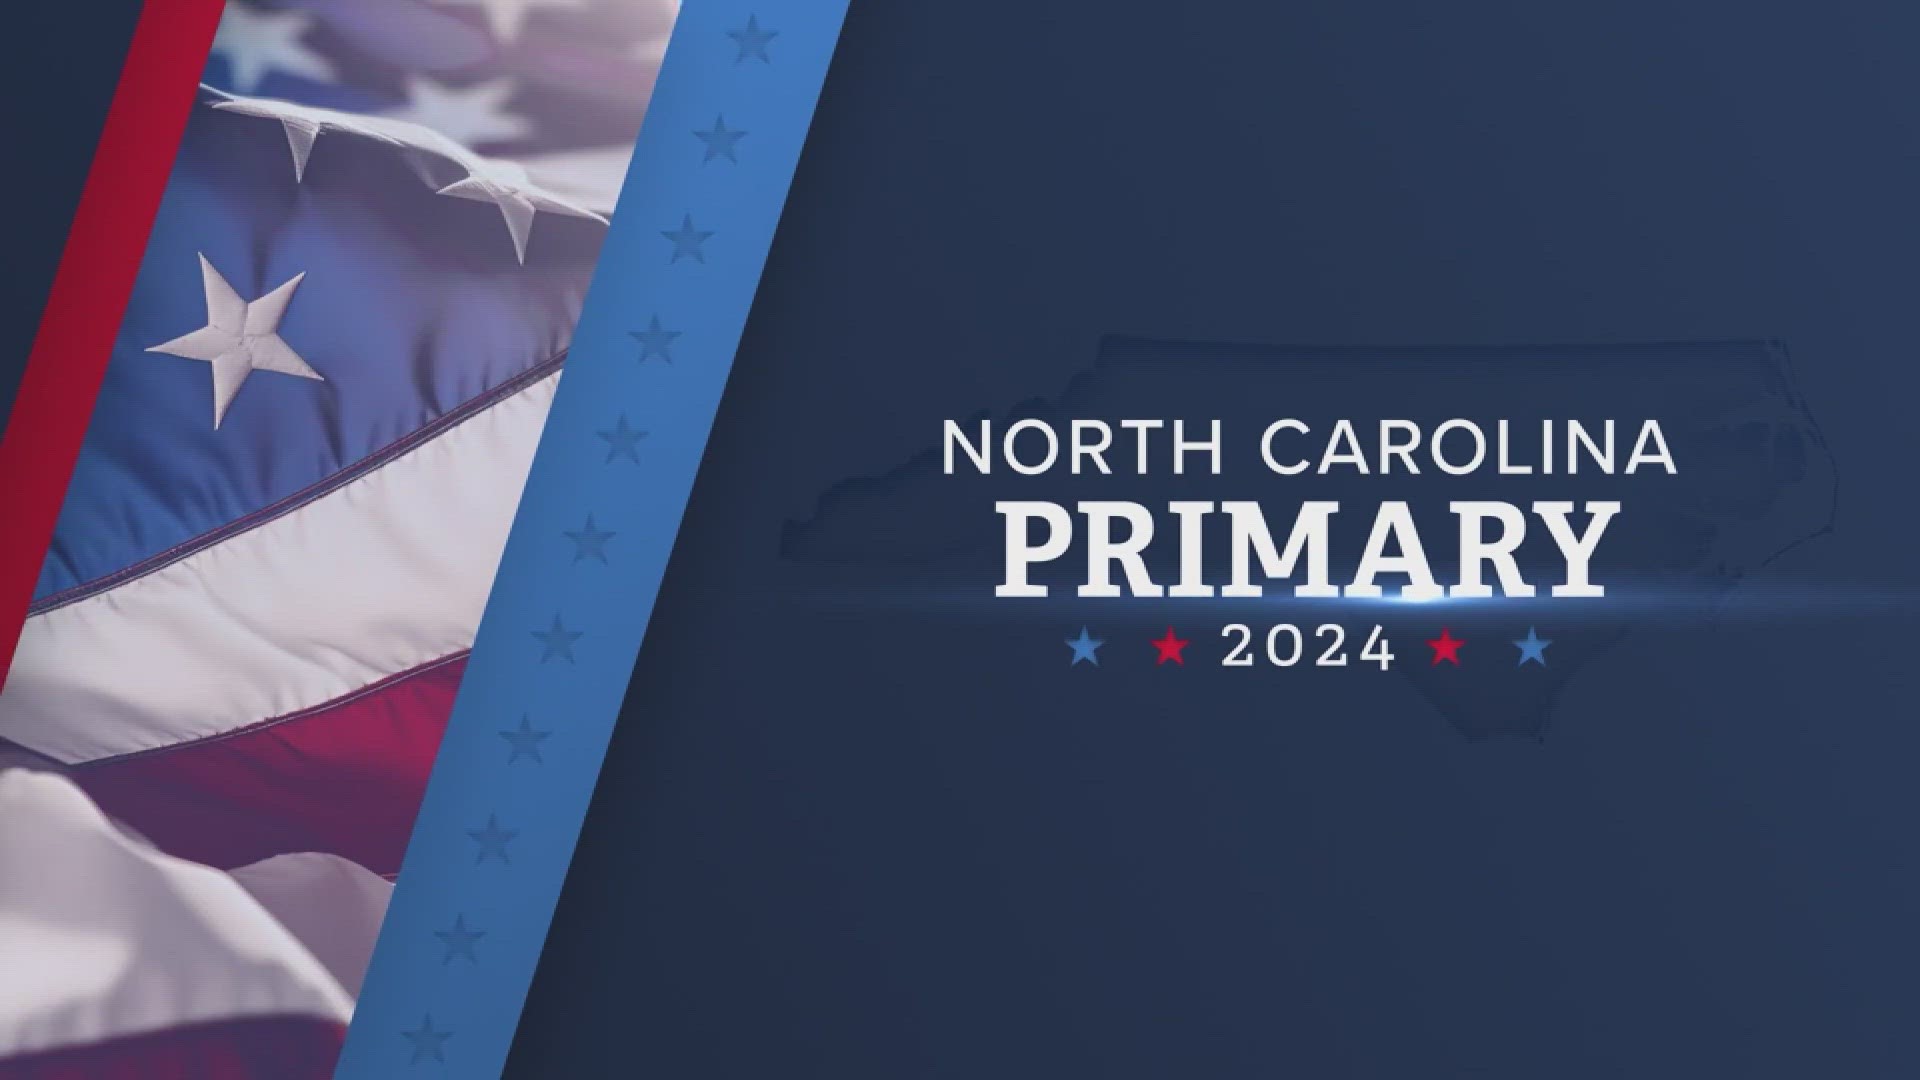 Today is the day to go to the polls and submit your vote for the leaders of NC and the country.